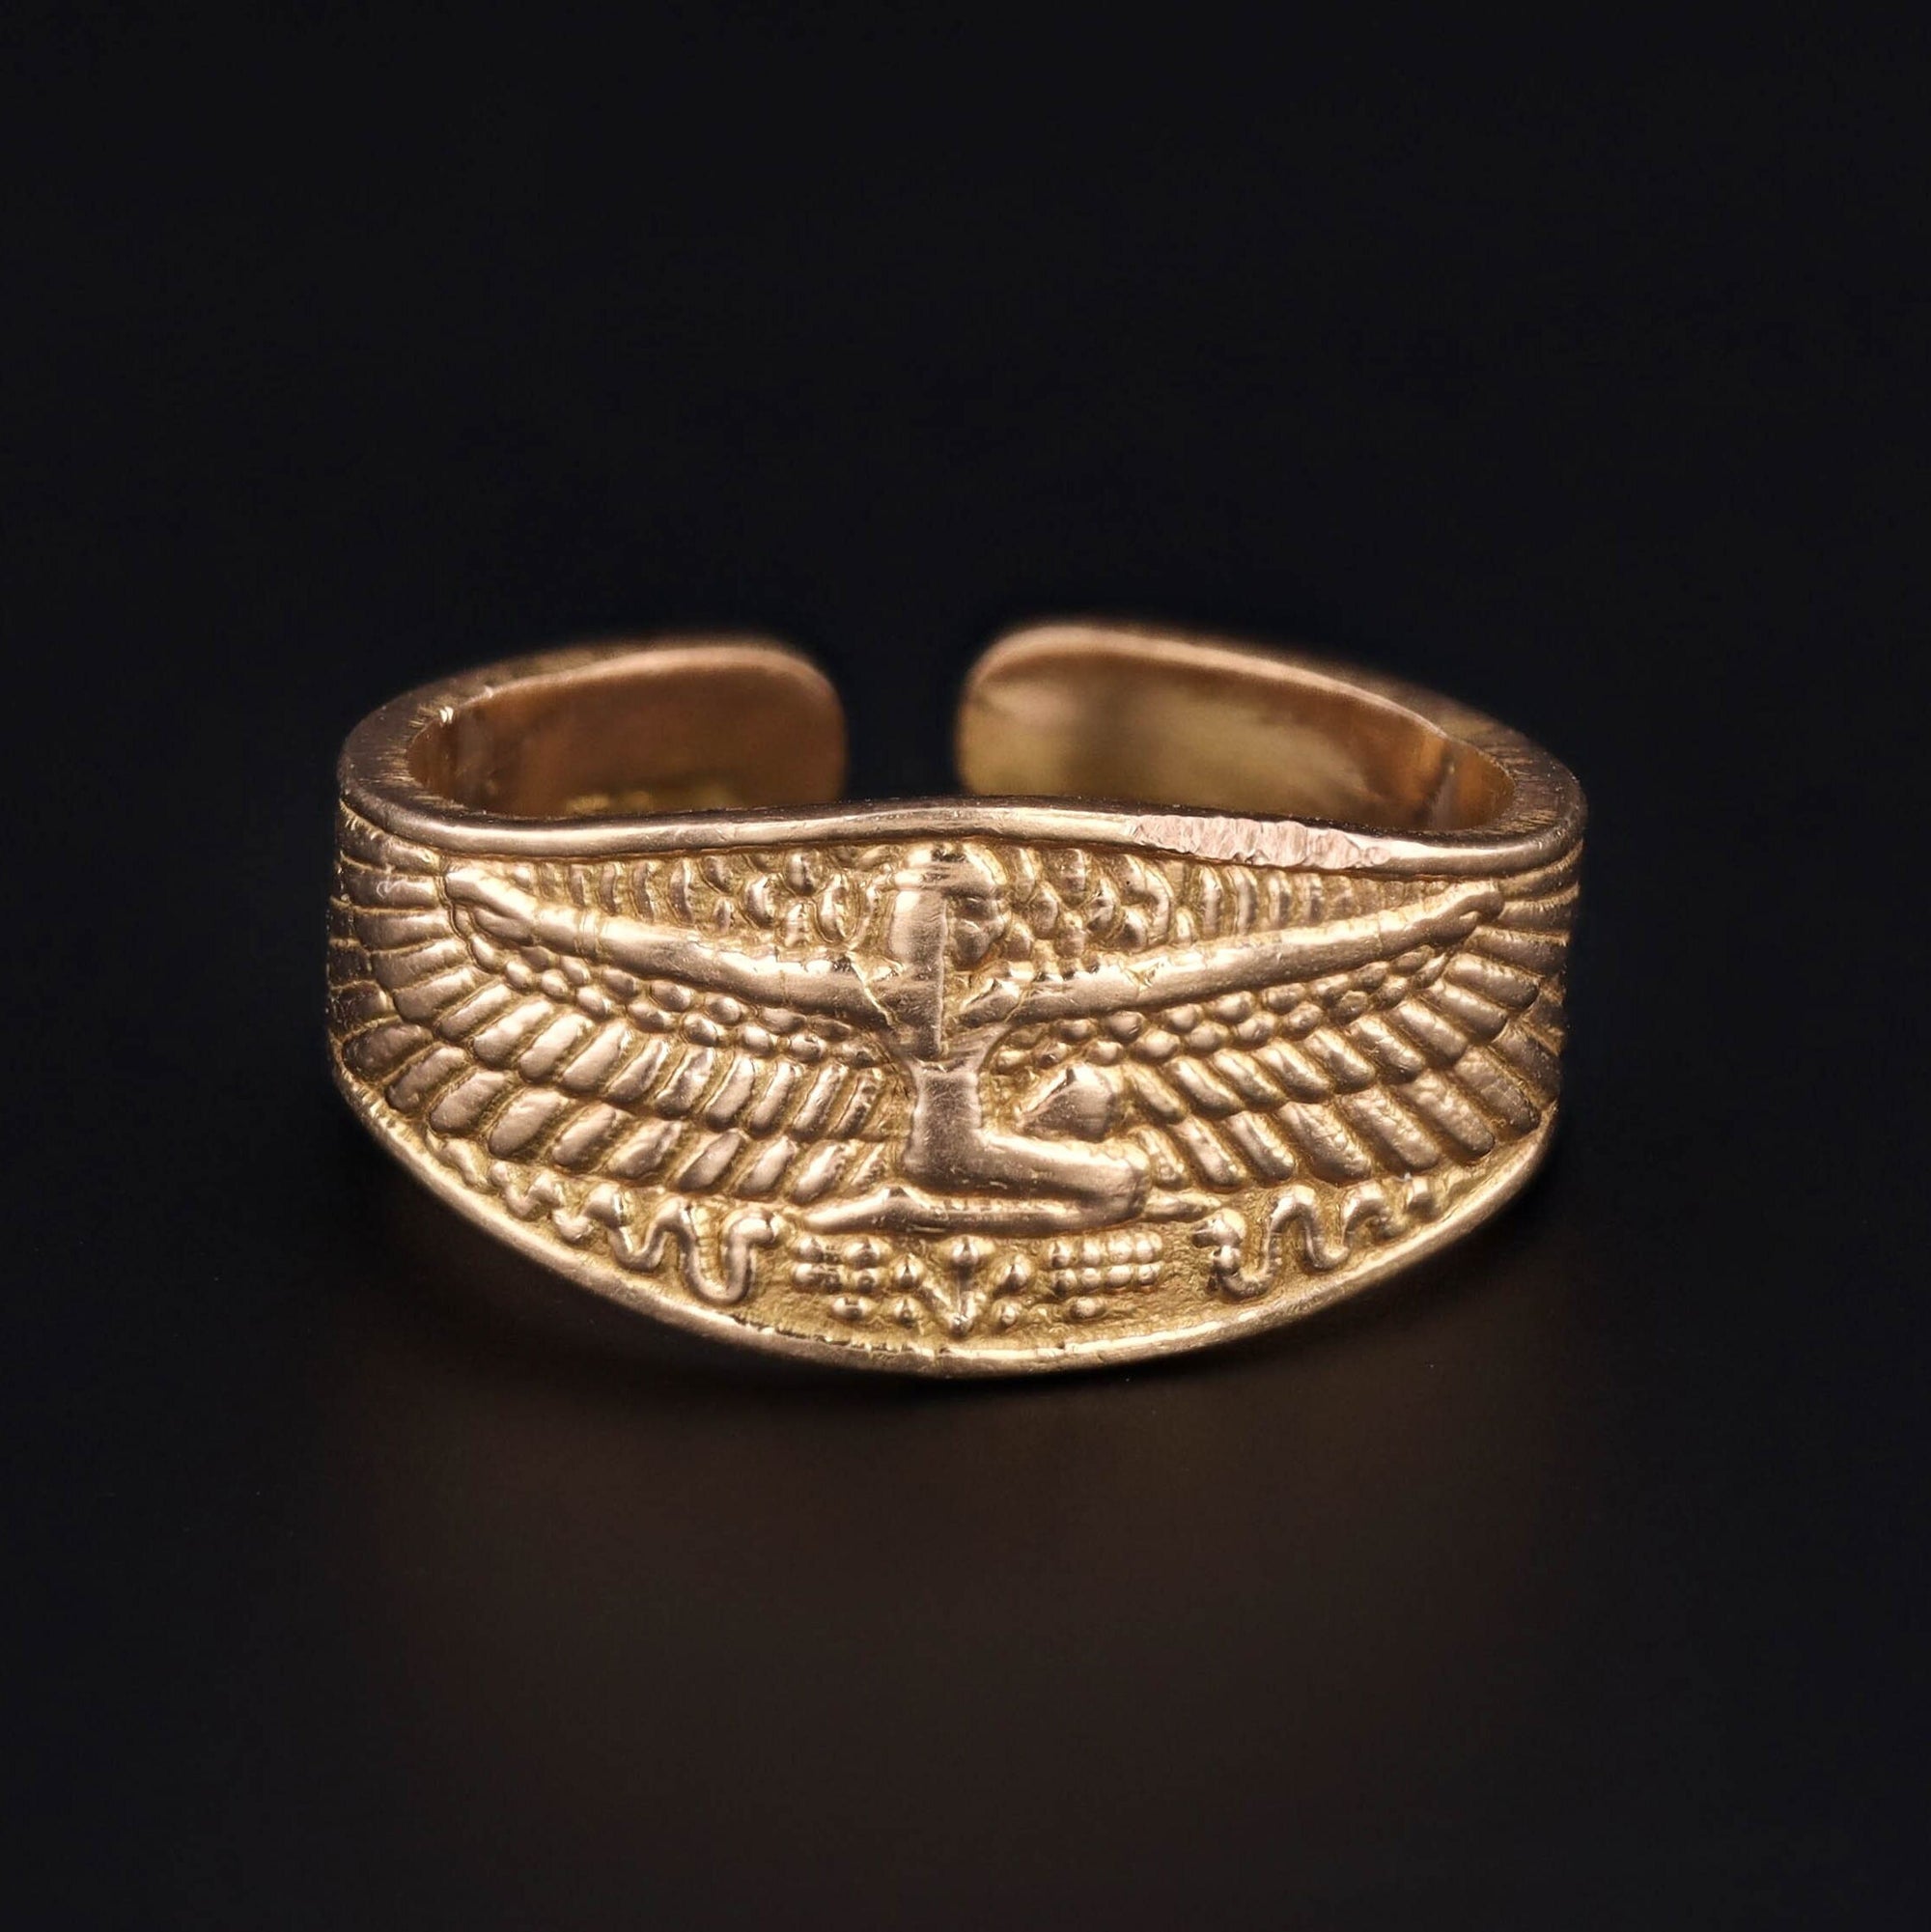 Egyptian Revival Ring | Isis Ring 